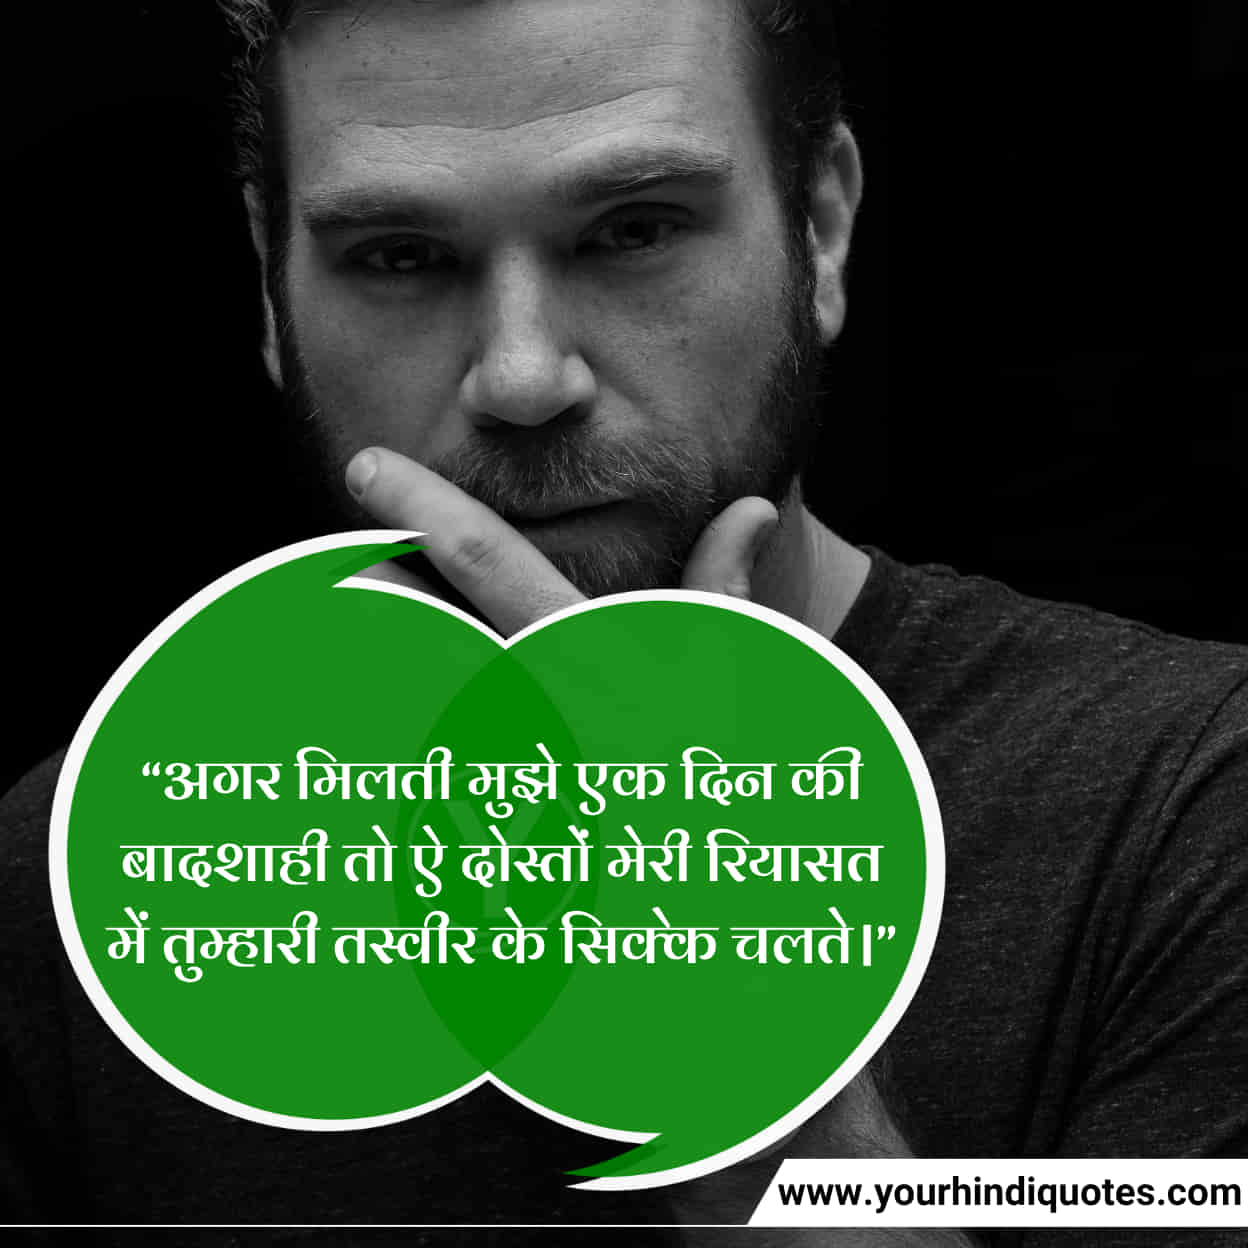 Hindi Friendship Day Quotes